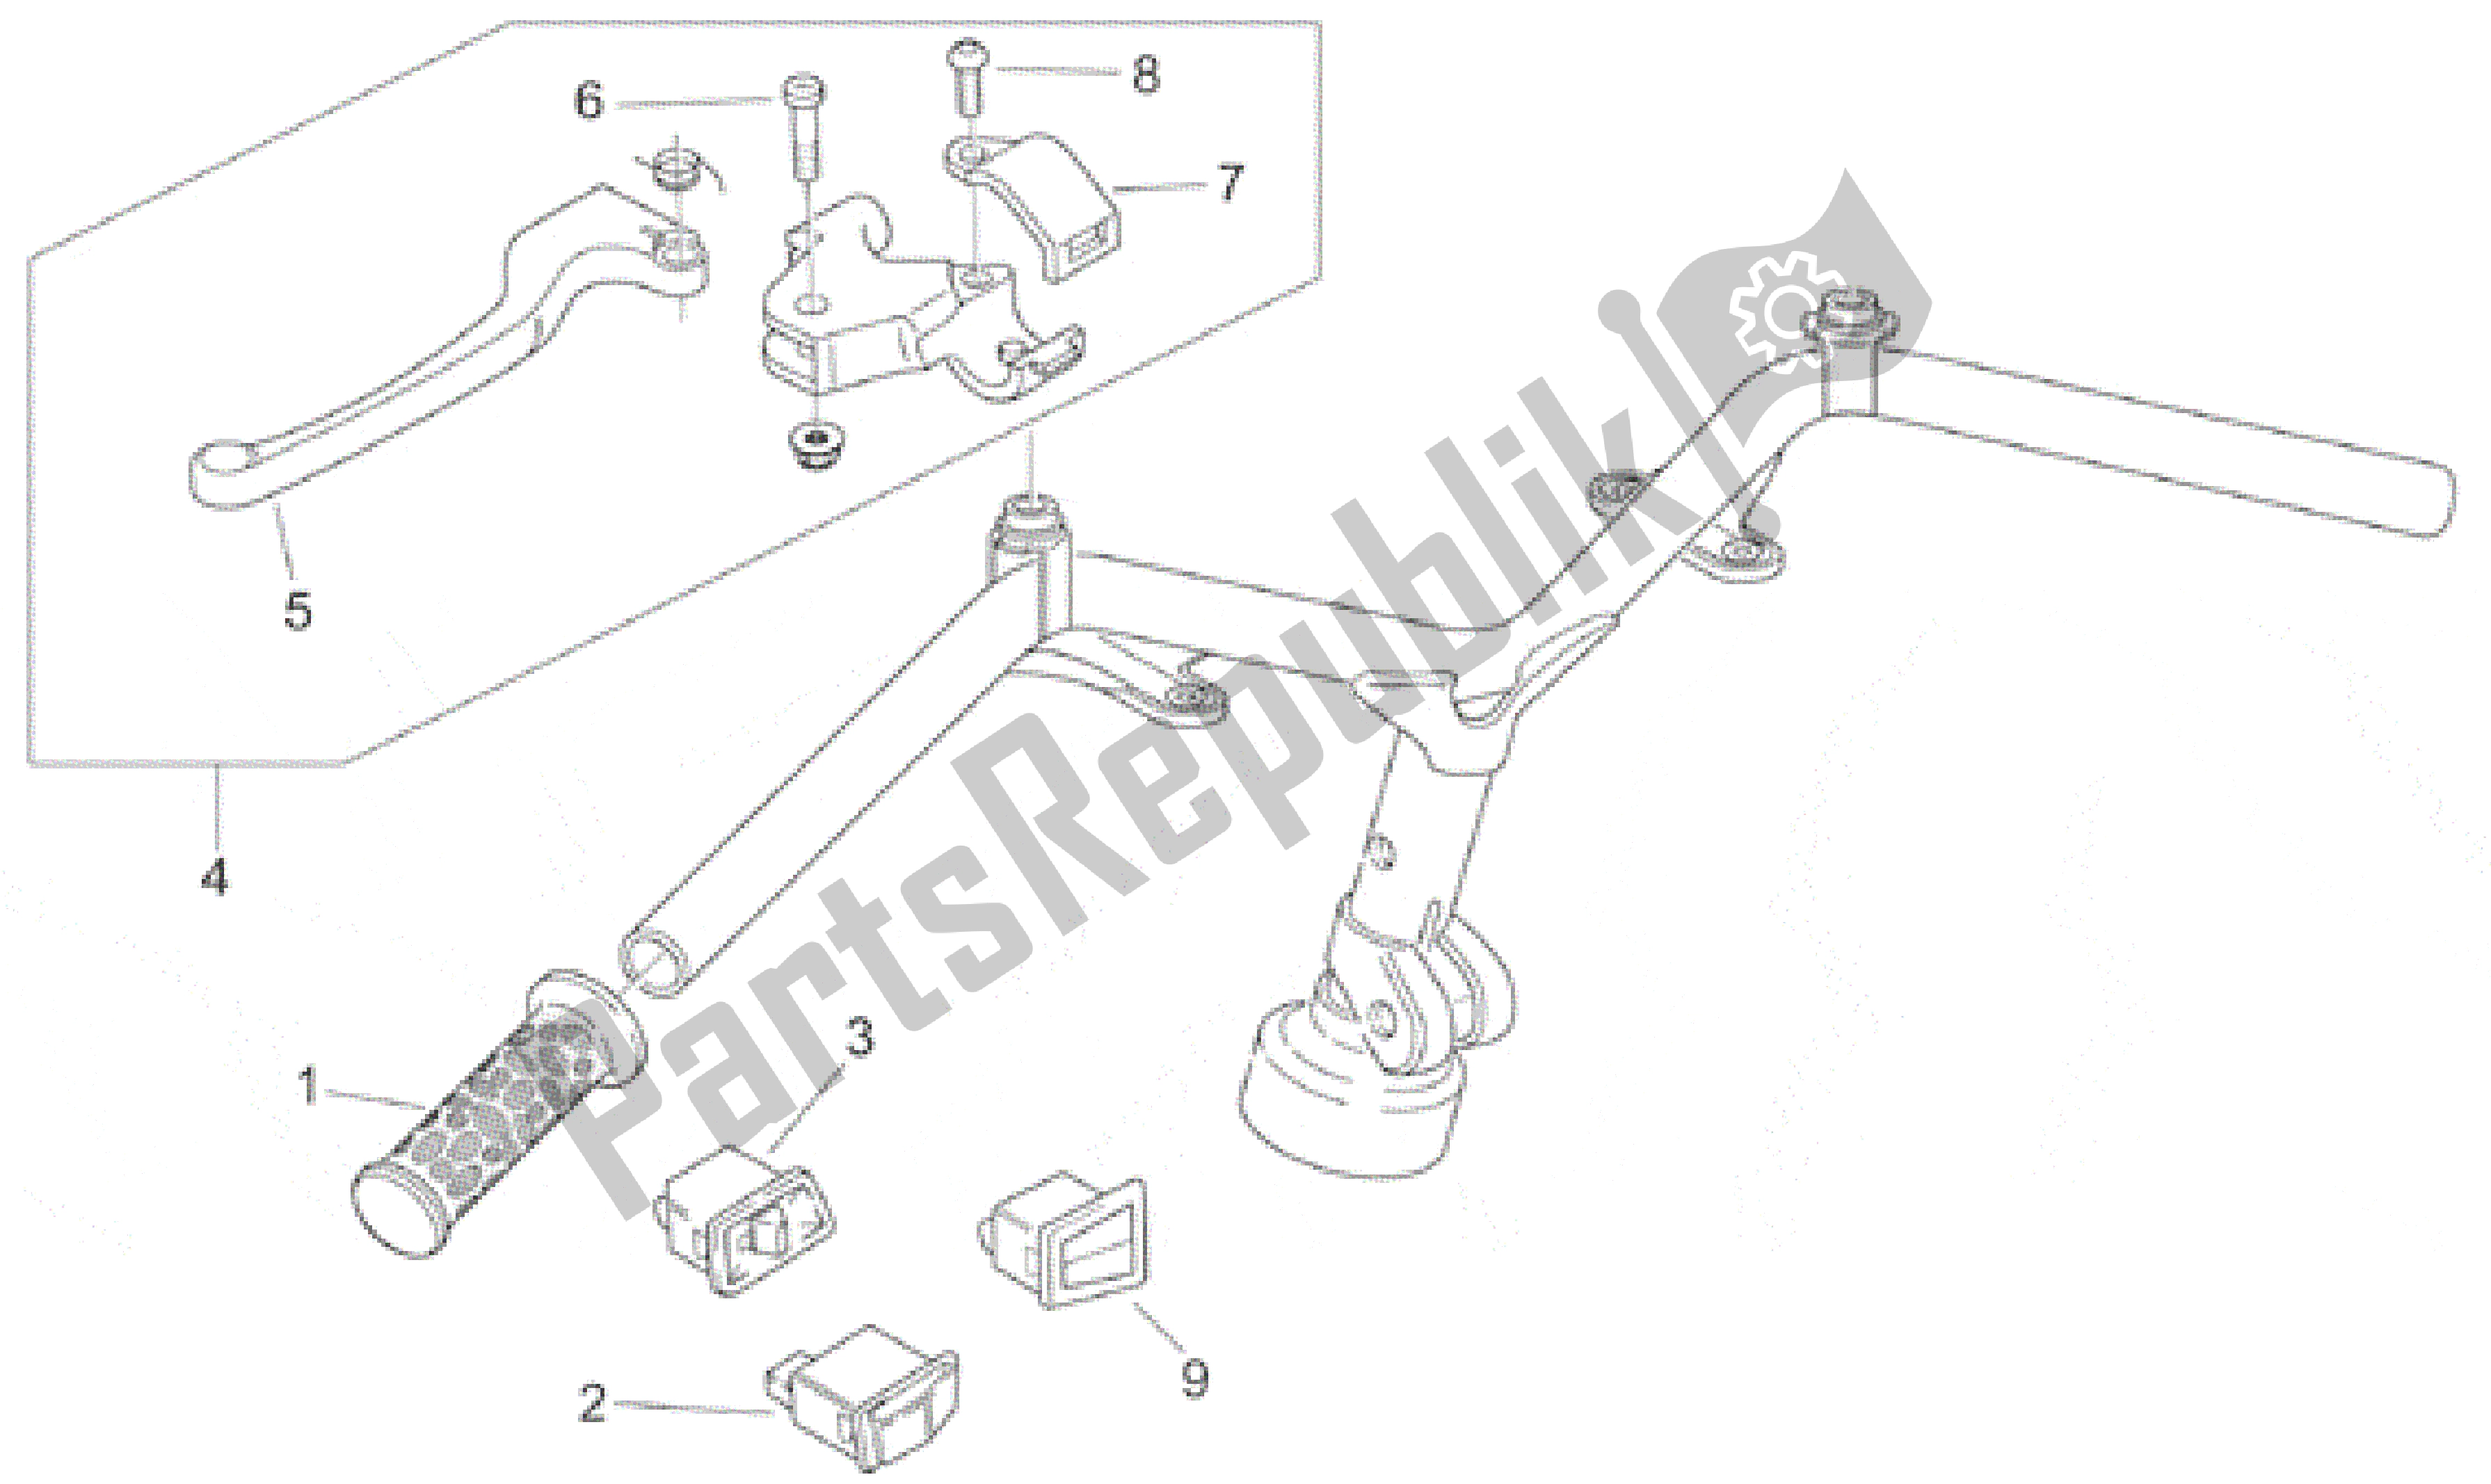 All parts for the Lh Controls of the Aprilia Habana 50 1999 - 2001